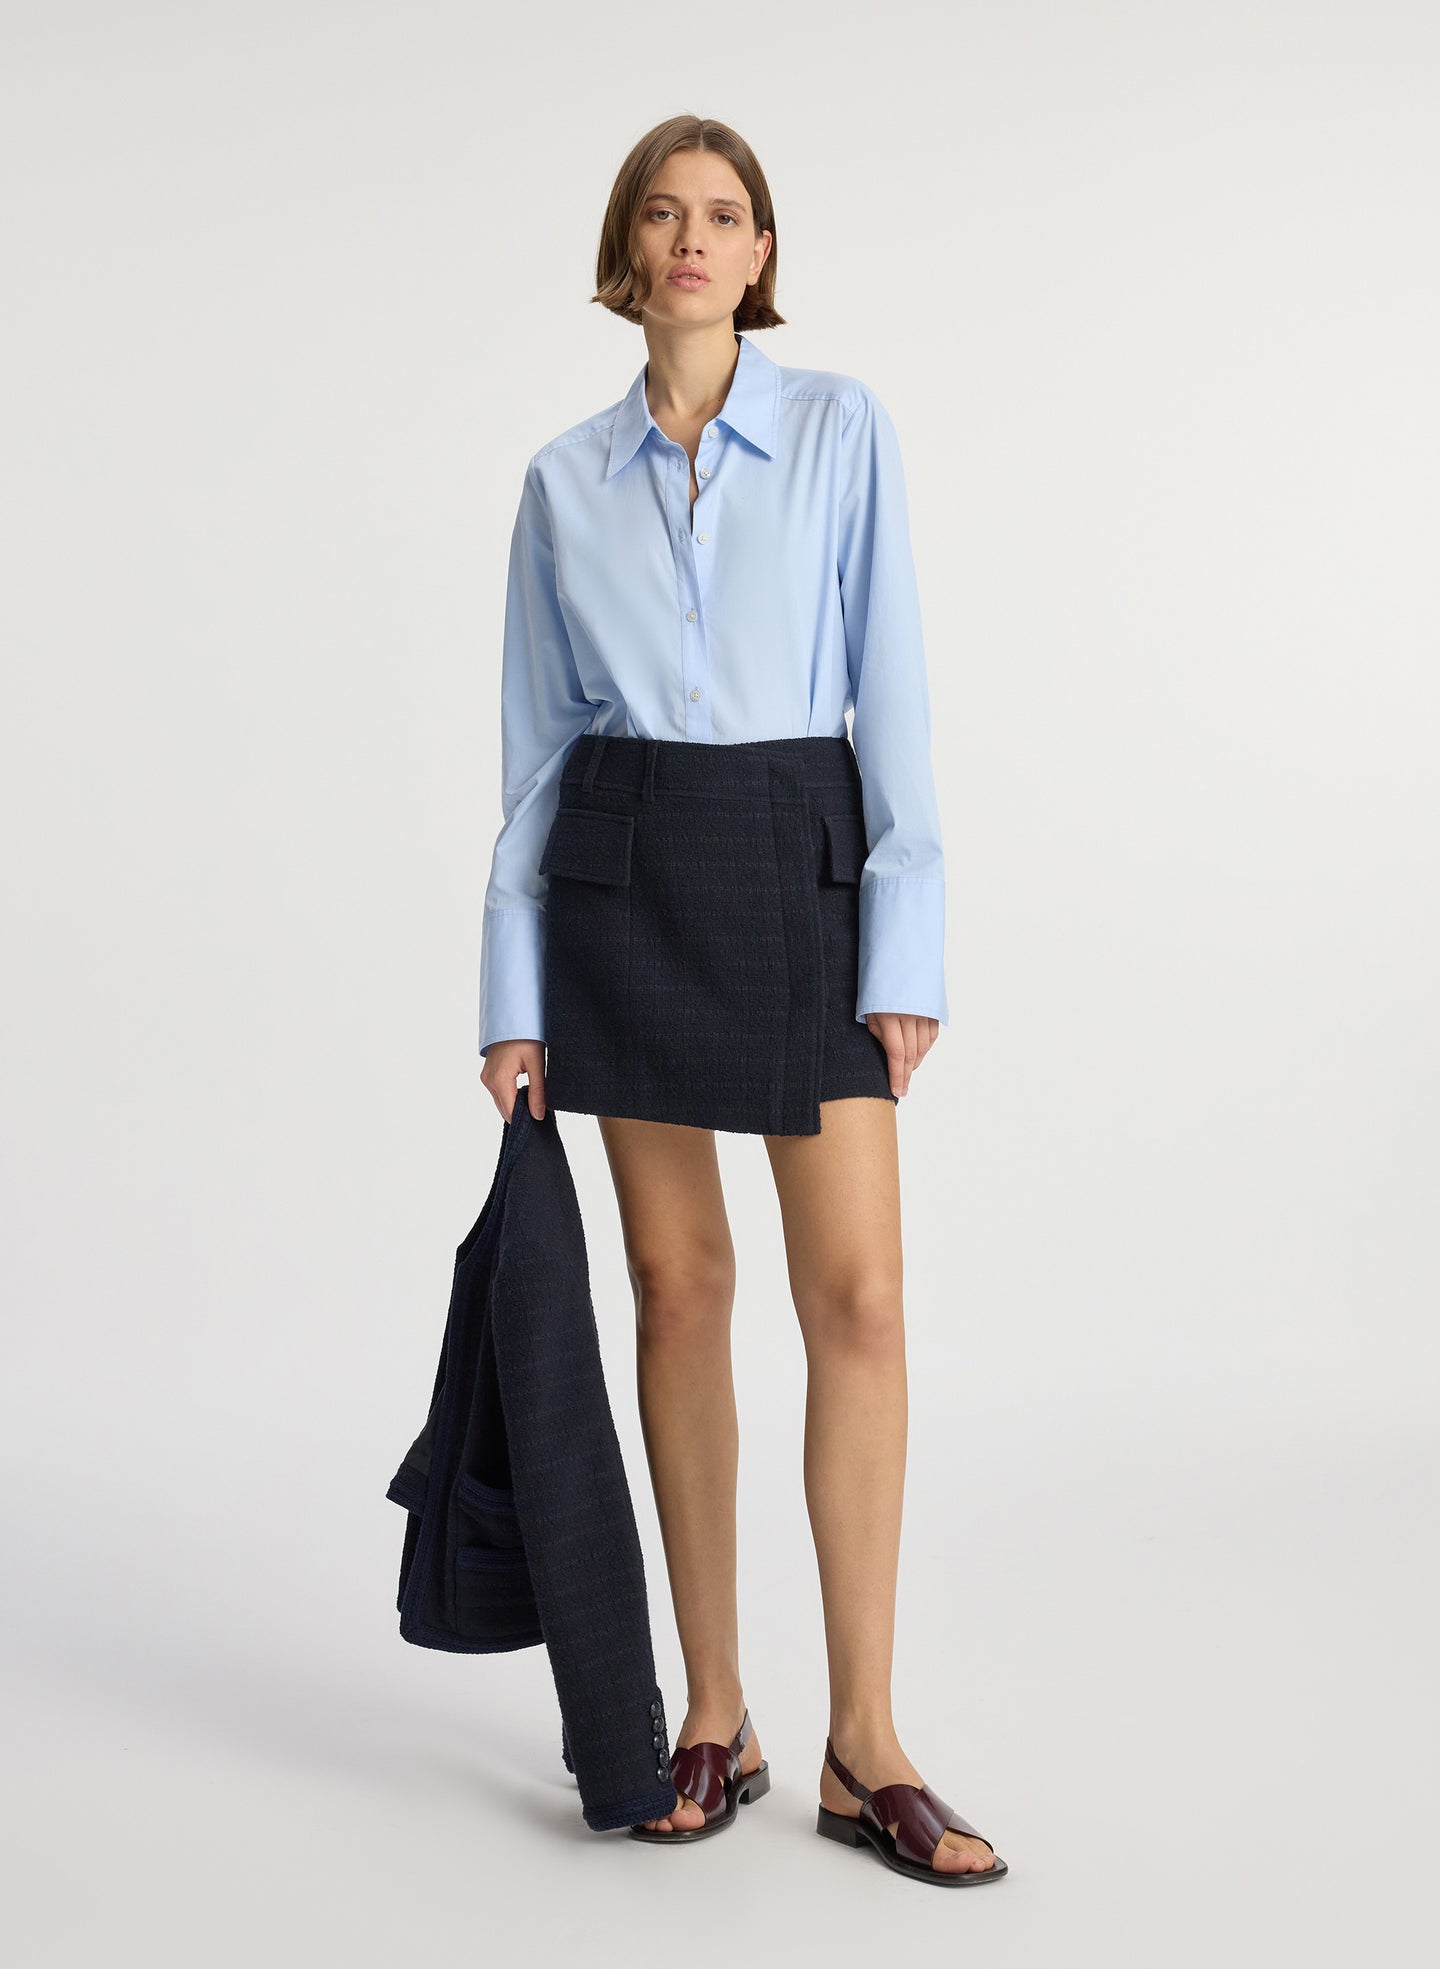 front view of woman wearing blue button down collared shirt and navy tweed mini wrap skirt while holding jacket